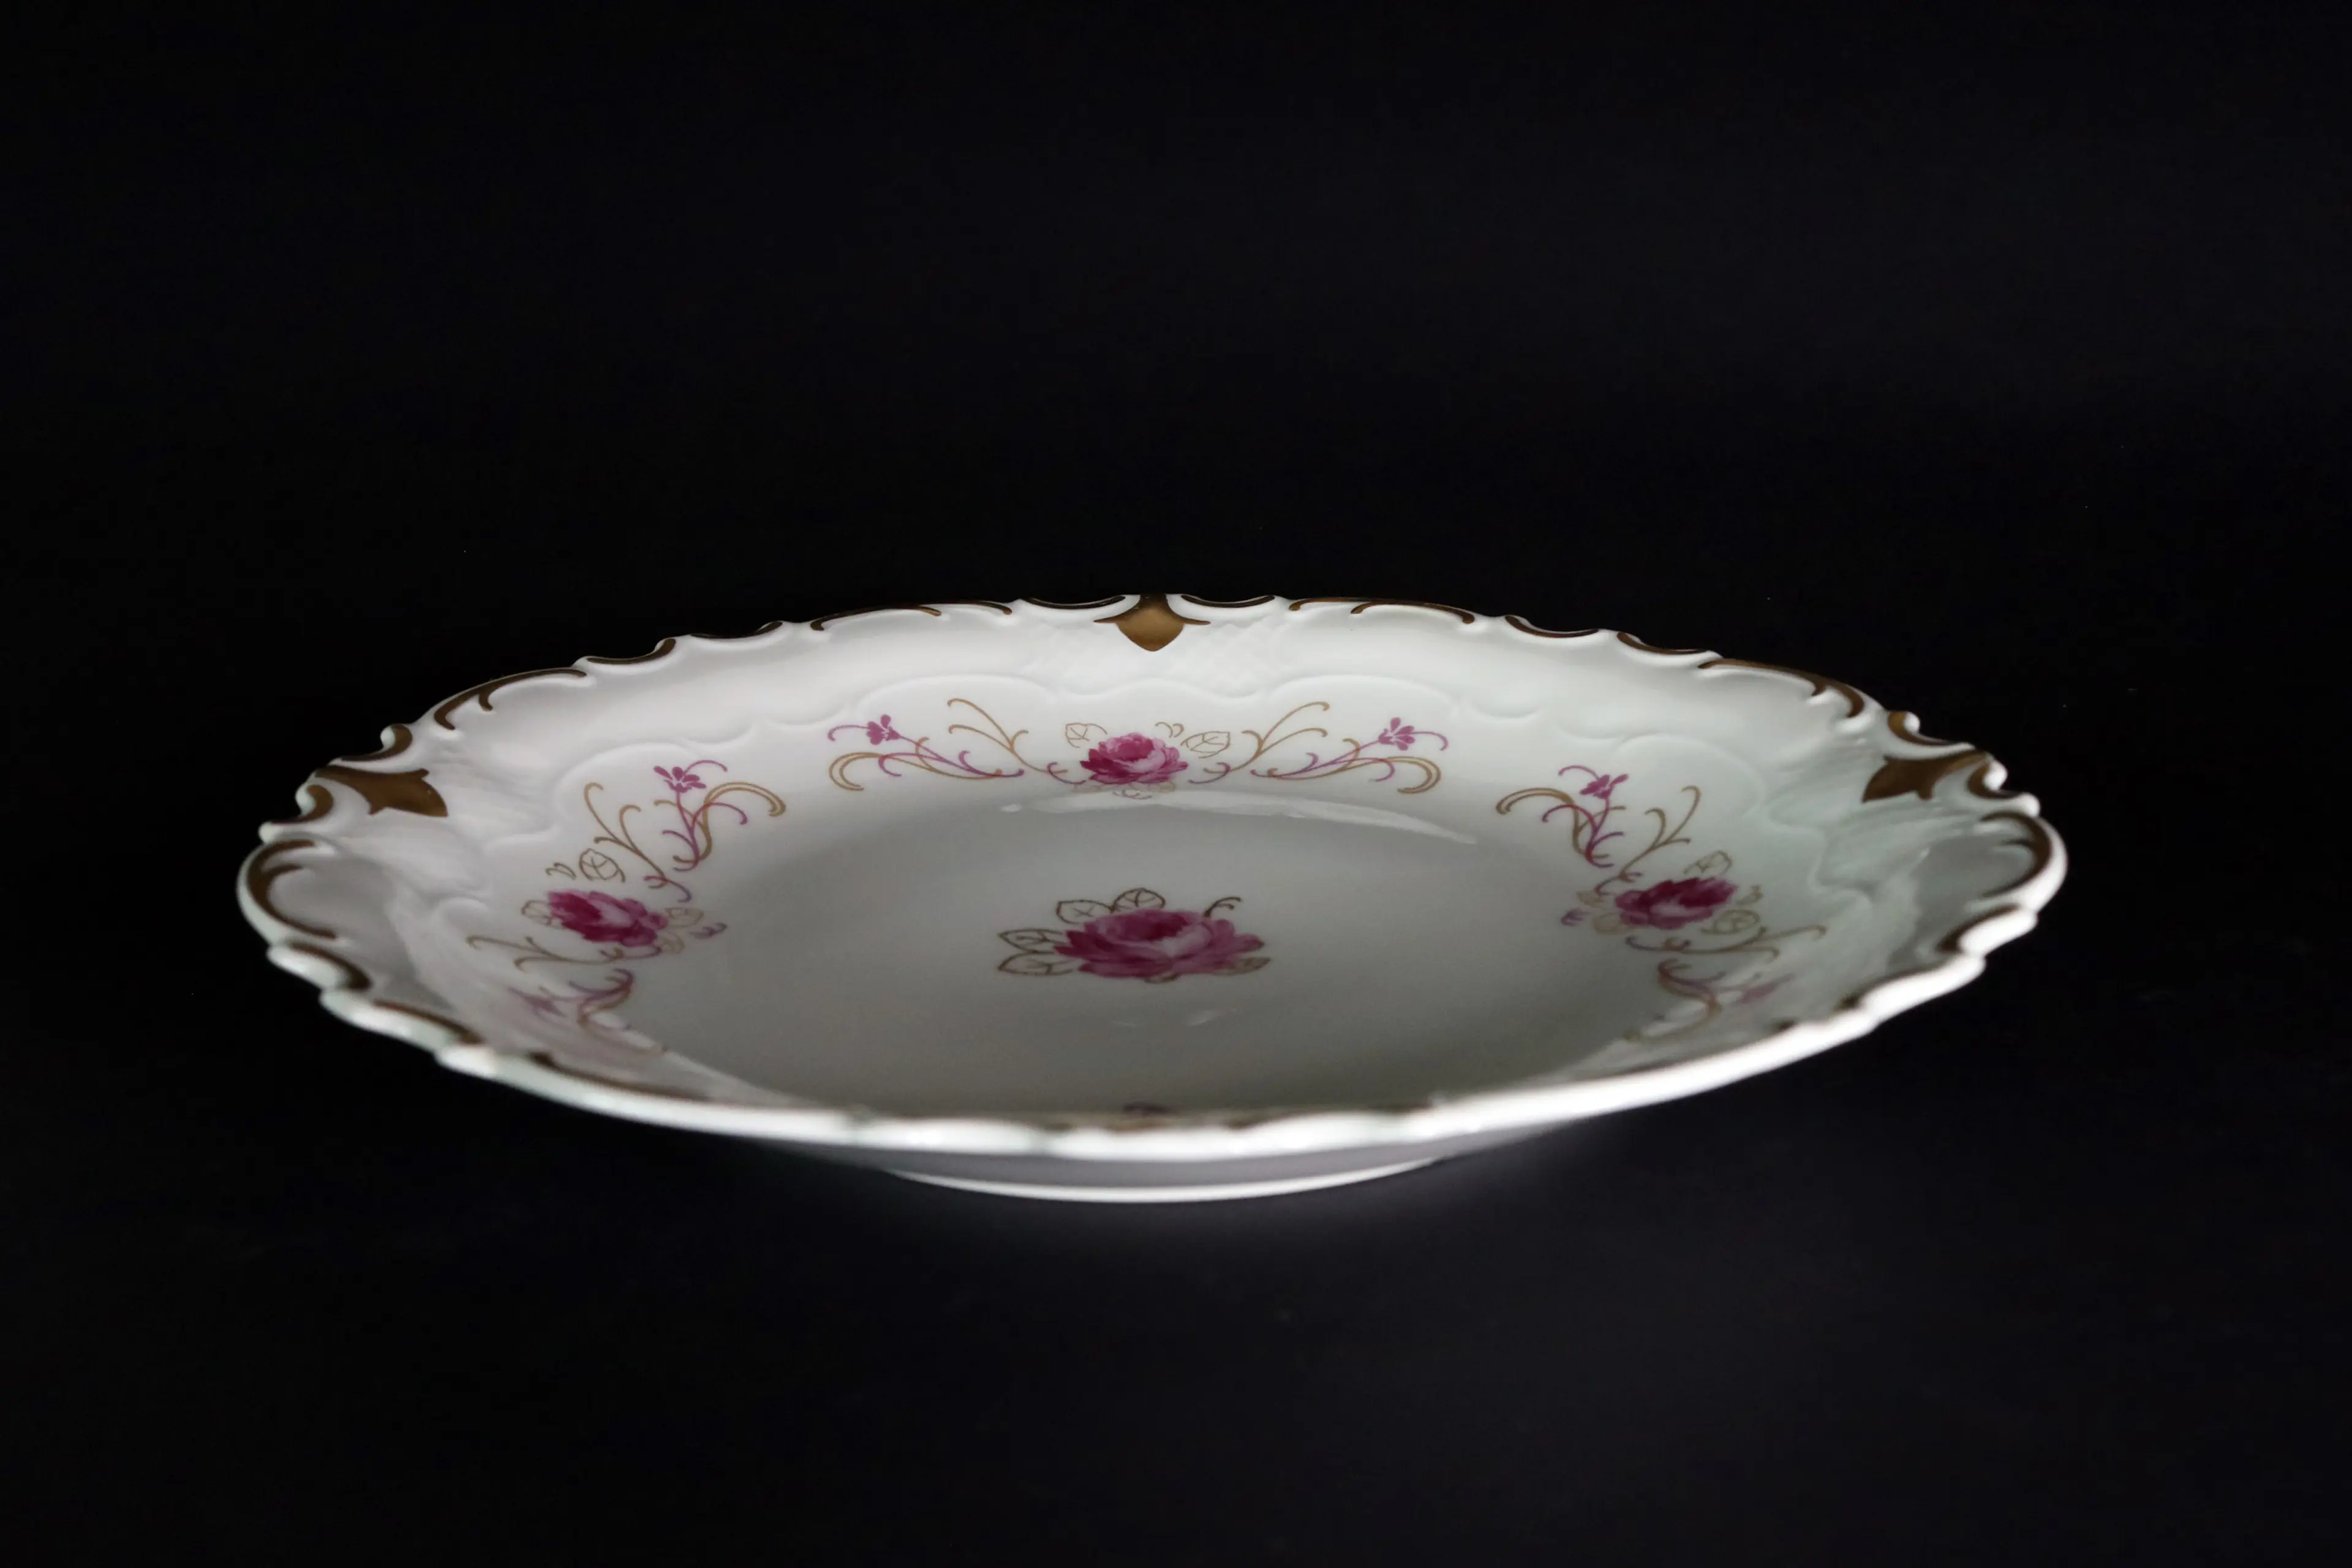 Porcelain Plate With Flowers